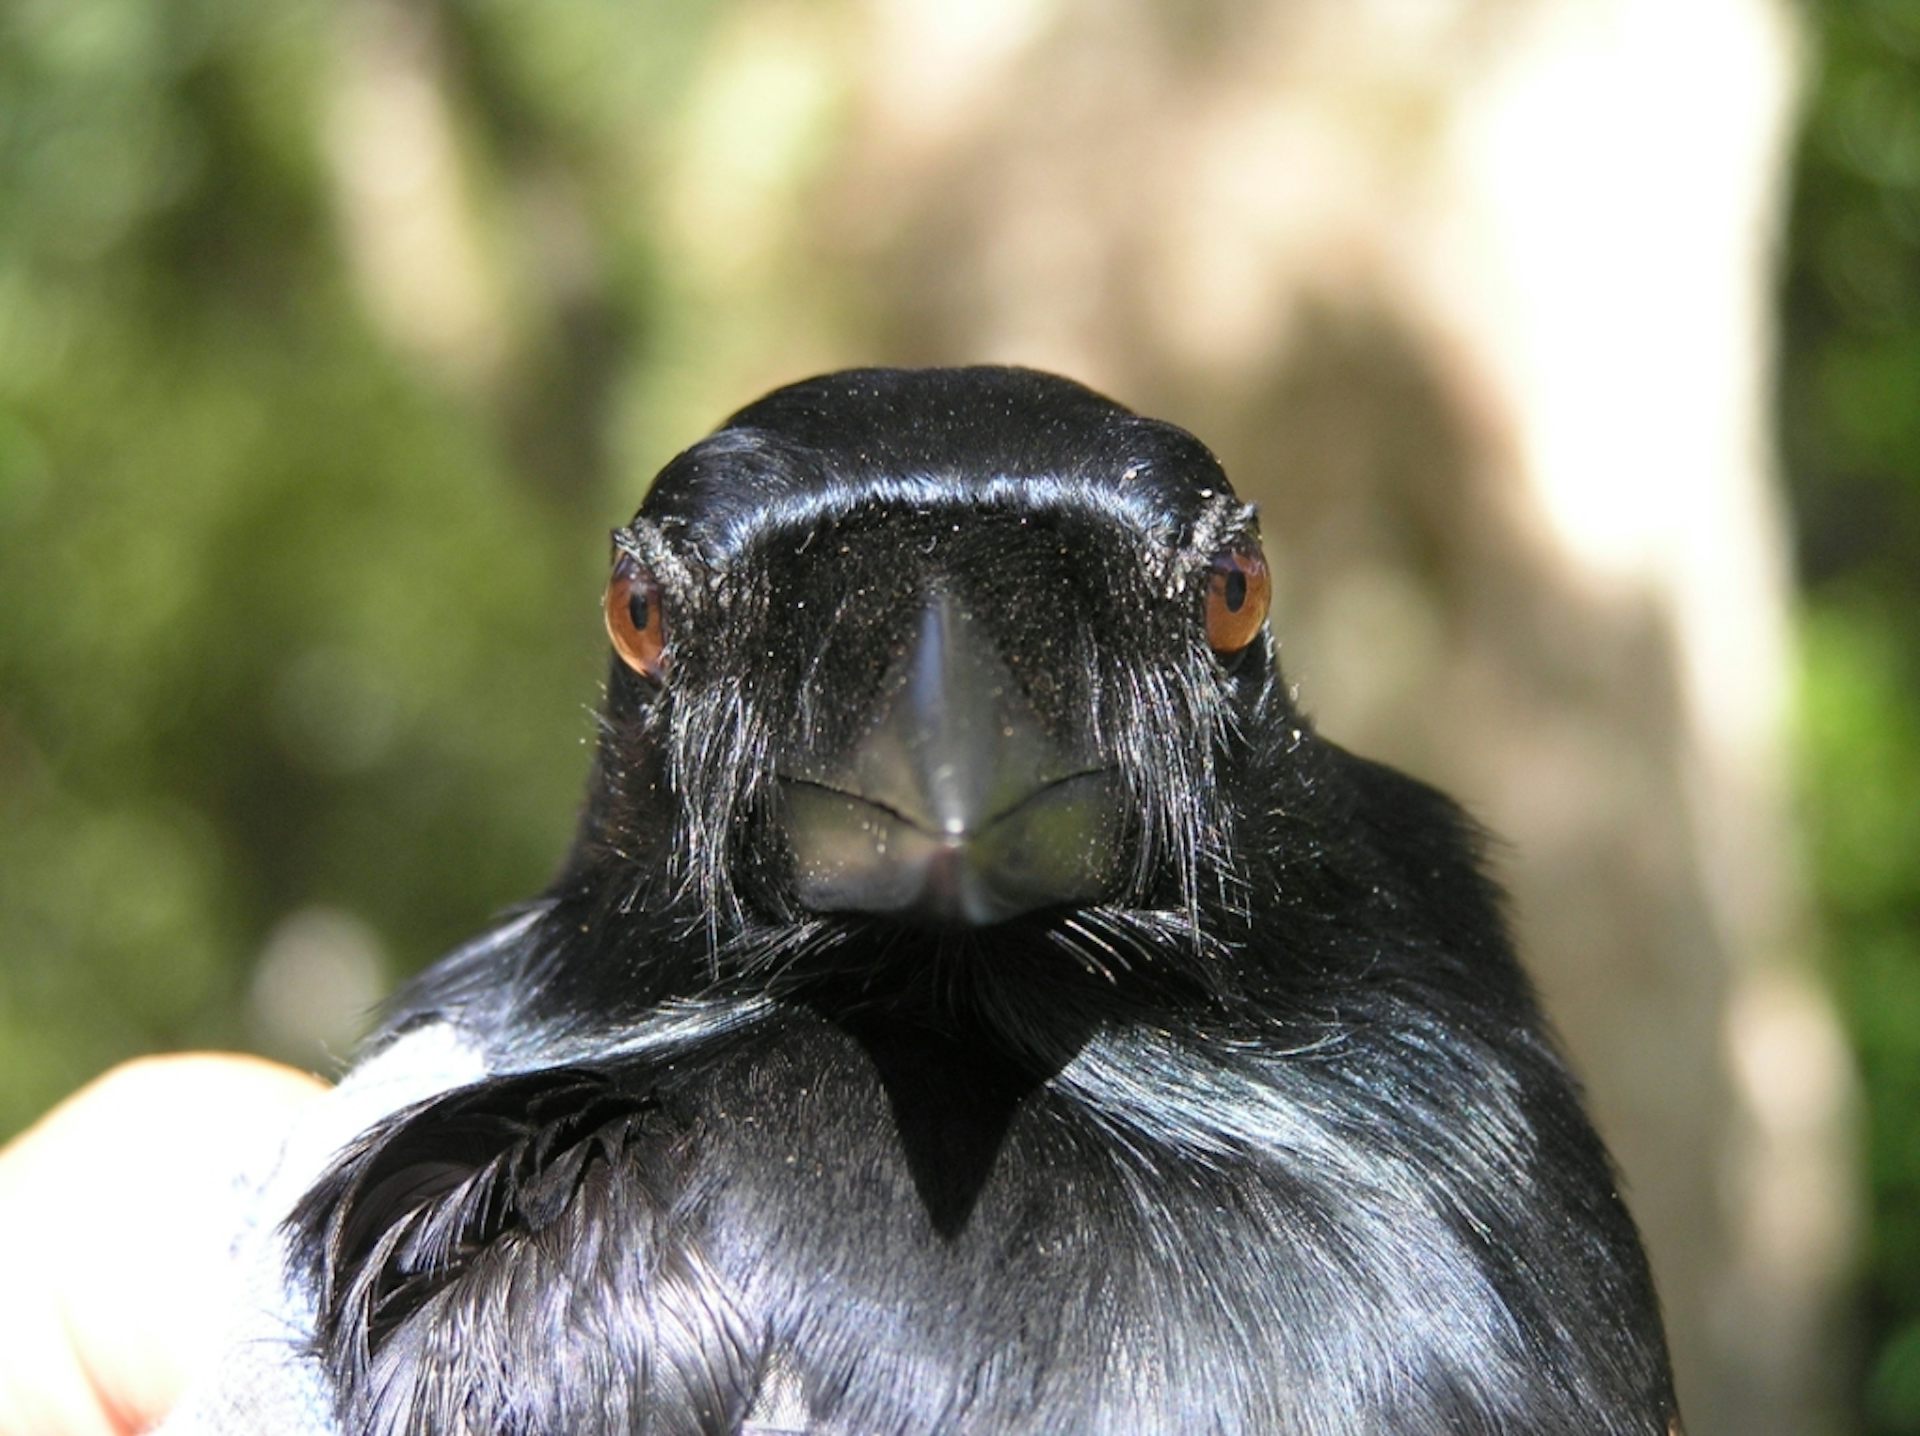 Crows, the technological tool specialists of the avian world